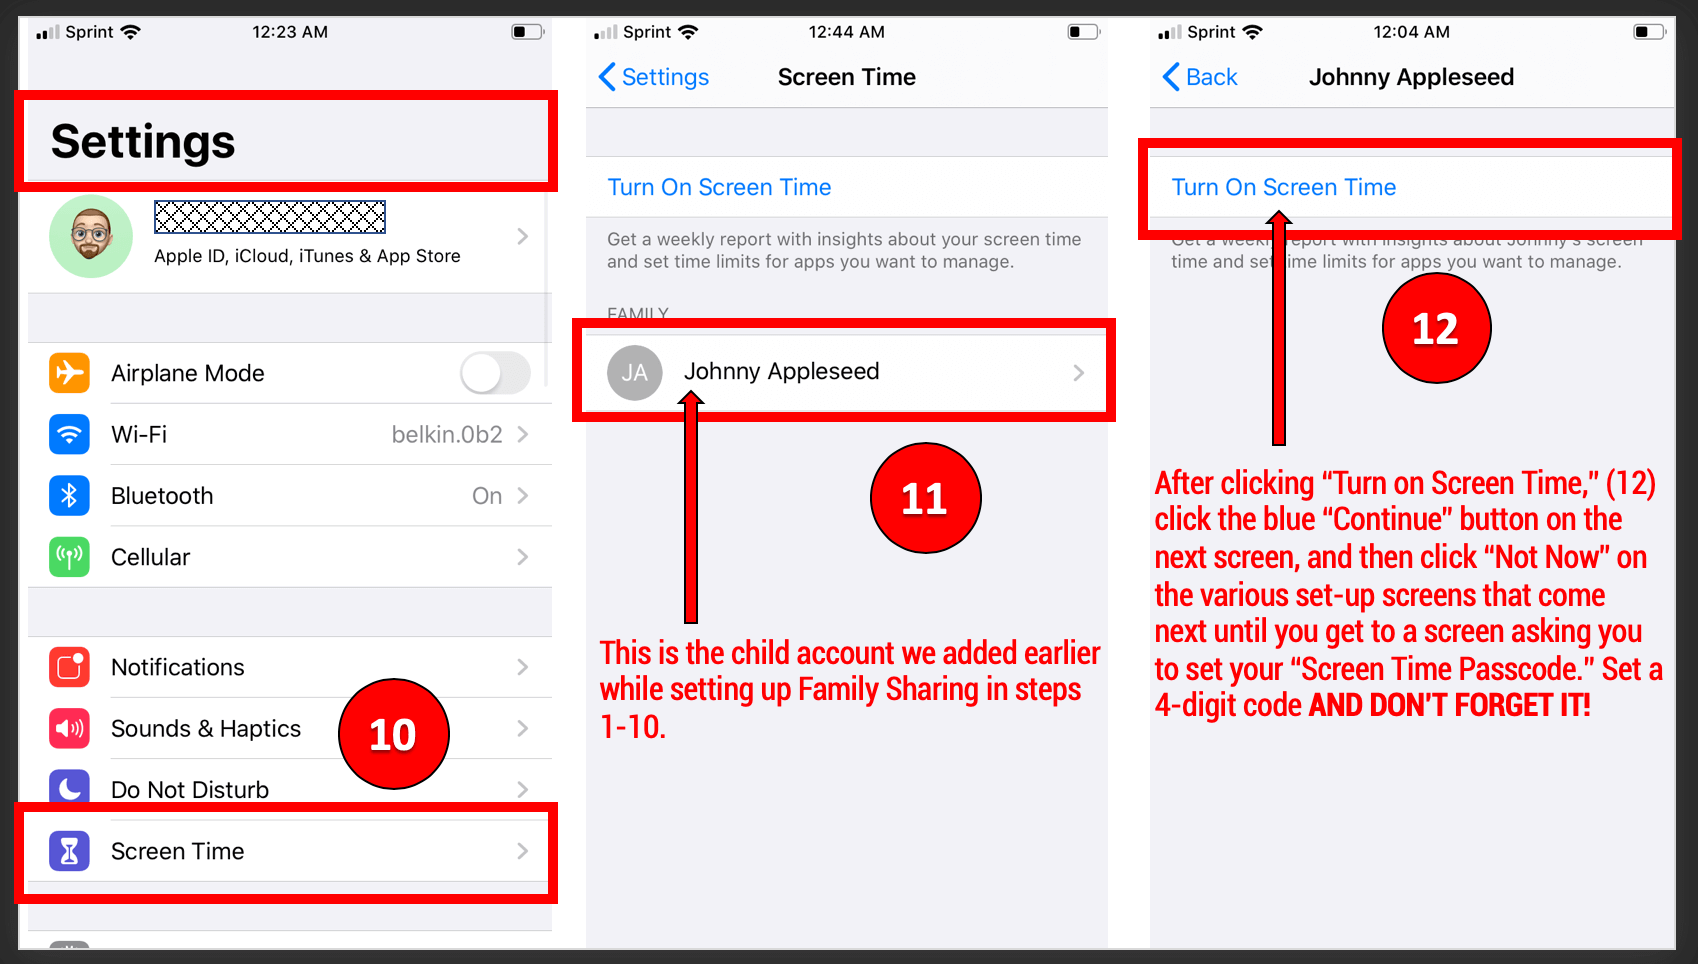 Real 13 Old Porn Unblocked - iOS 13 Parental Controls Explained - Protect Young Eyes Blog